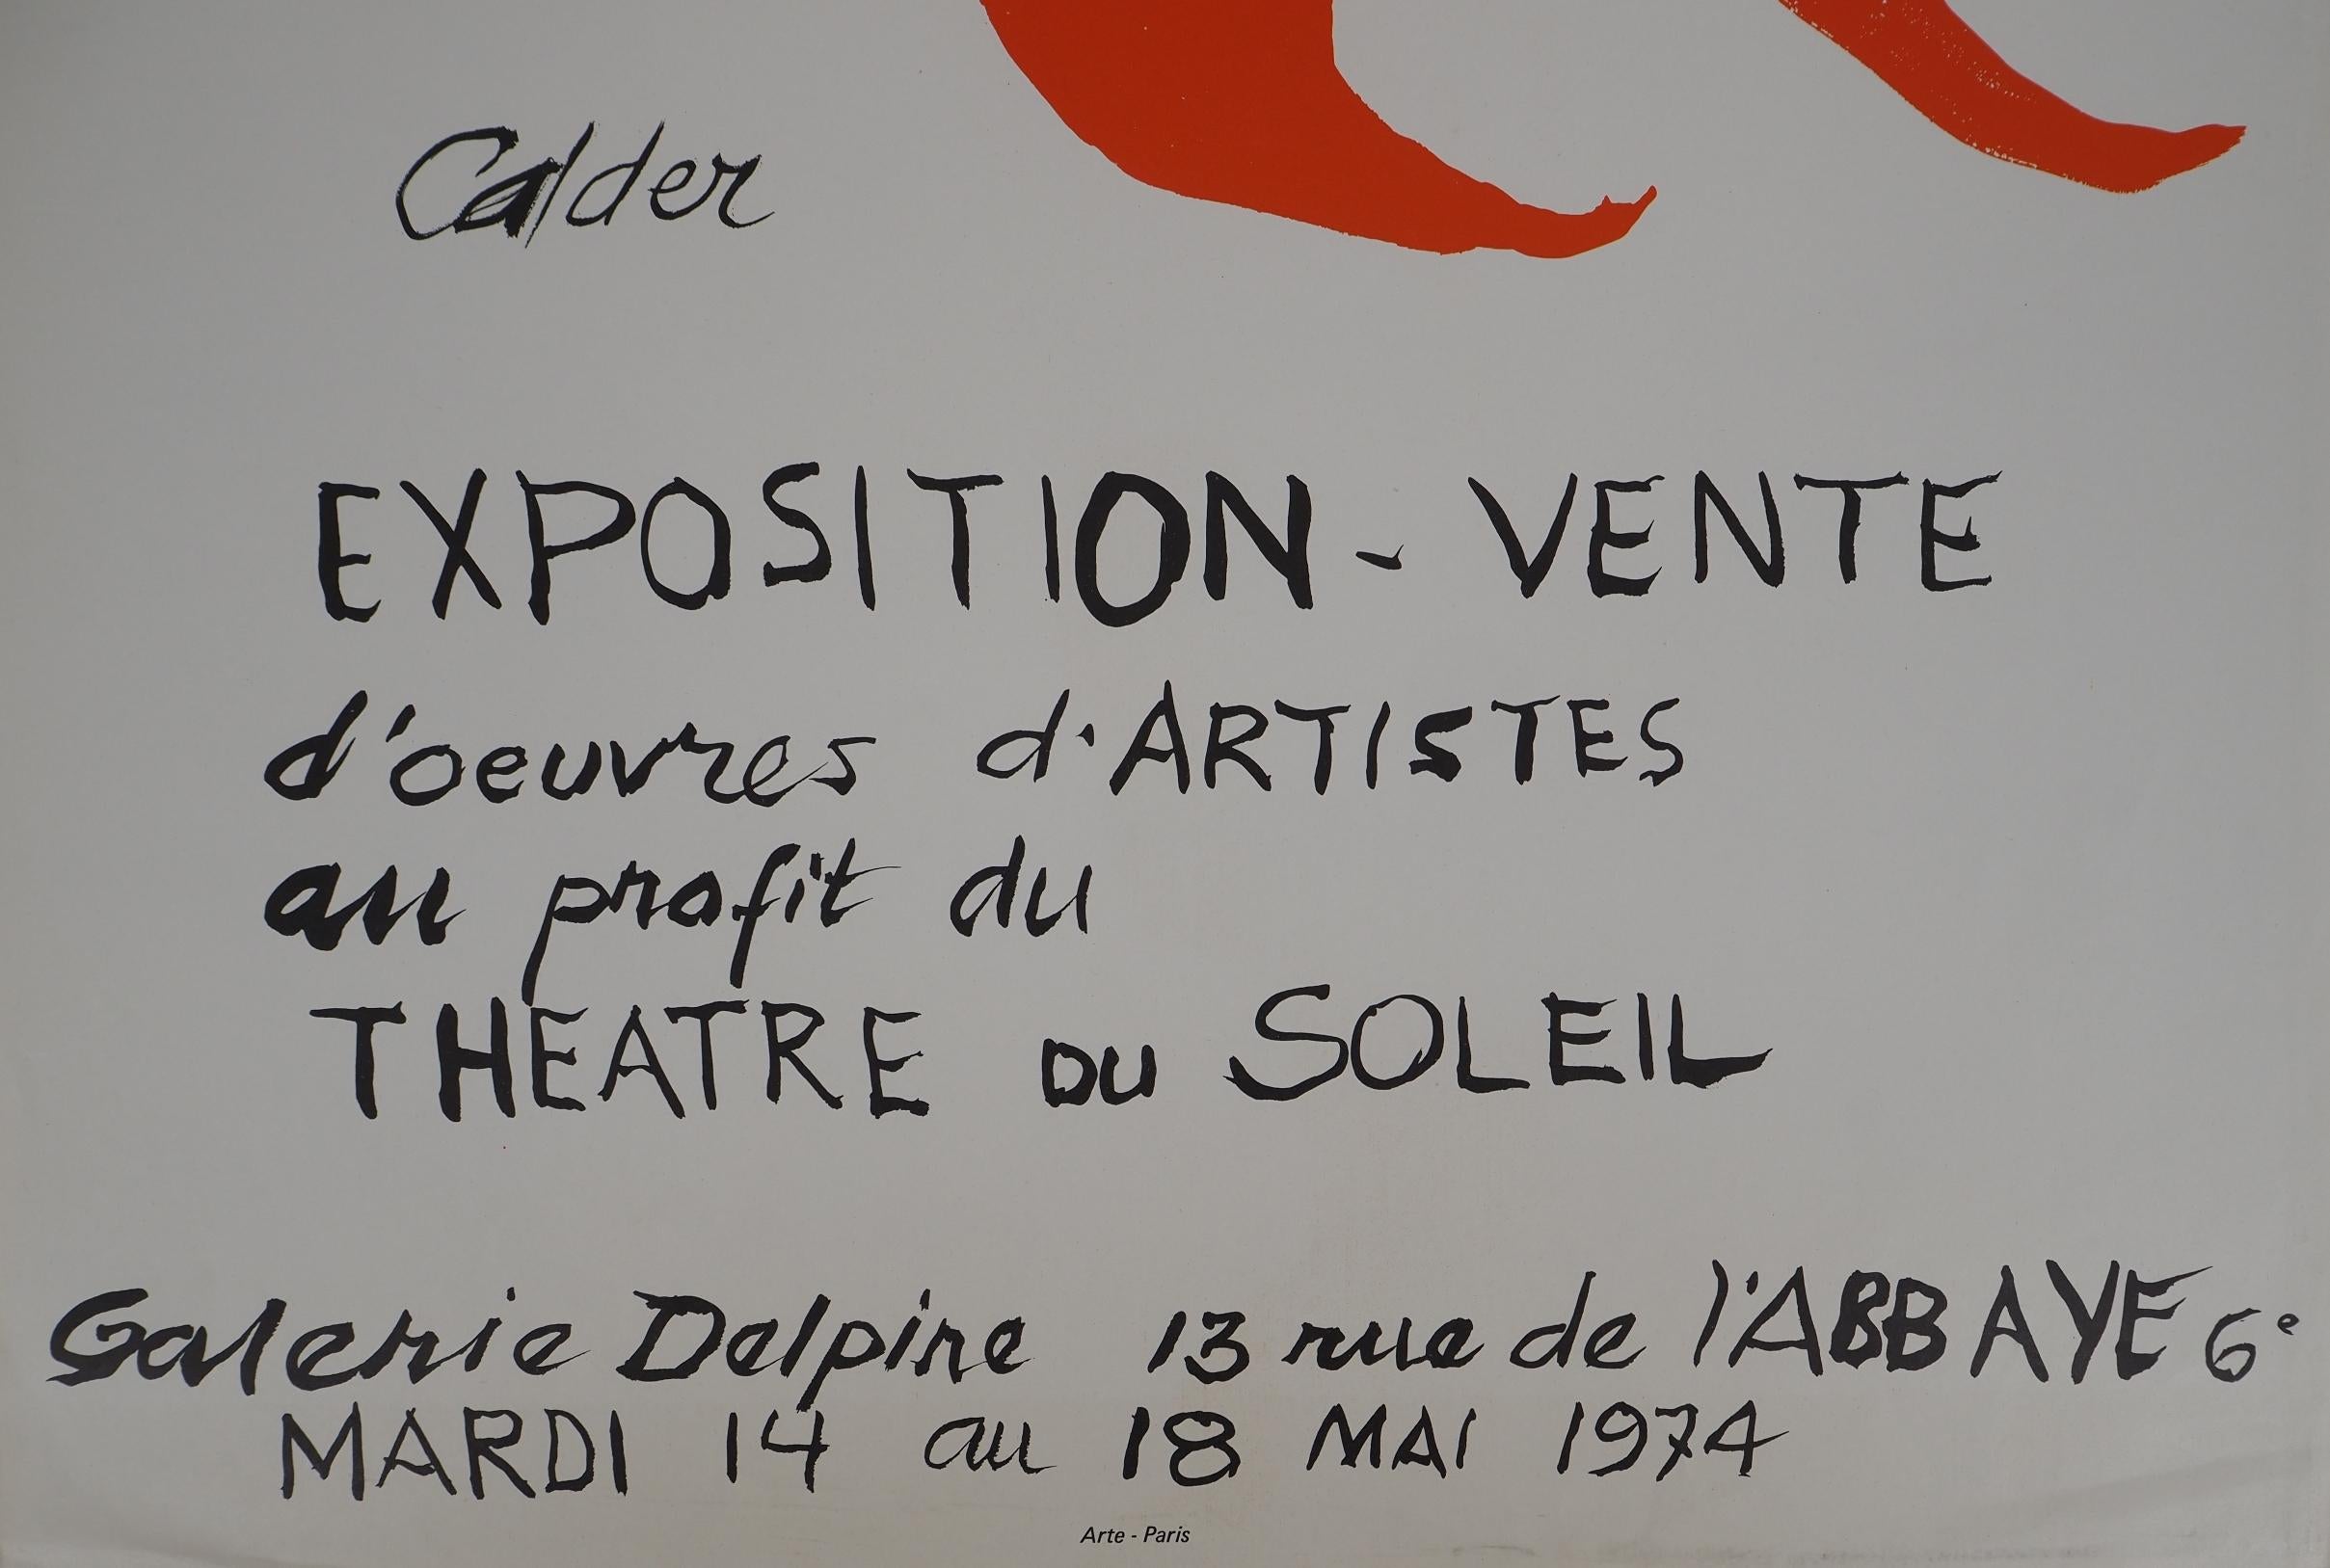 Alexander CALDER
Shining Sun (Theatre du Soleil, Galerie Delpire), 1974

Original Lithograph
Printed signature in the plate
On paper 78 x 51 cm (c. 31 x 20 inch)

INFORMATION : Rare lithograph poster edited in 1974 by Galerie Delpire to the benefit